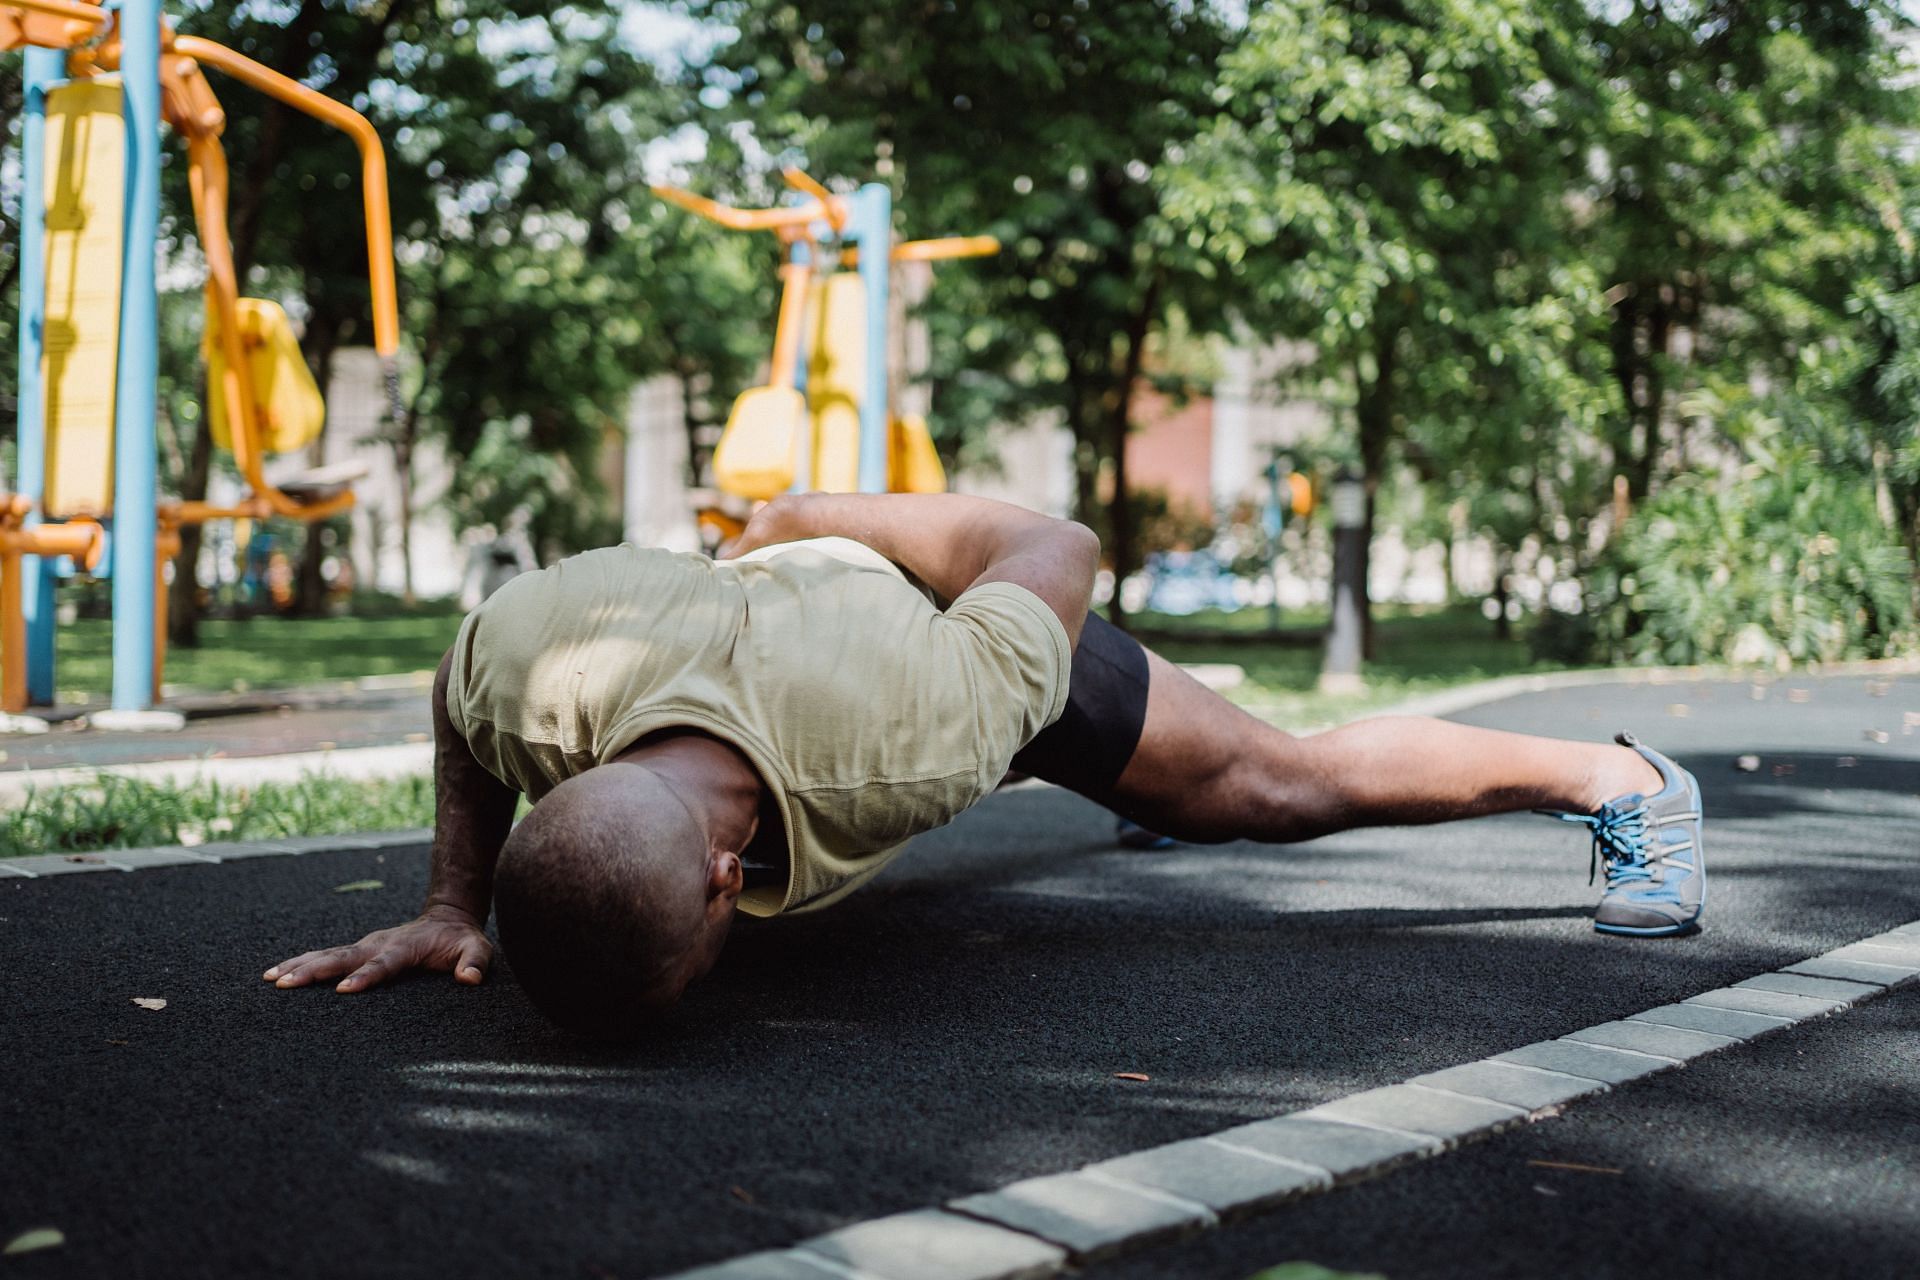 The single-arm push-up is one of the best push-ups for chest muscles! (Image via pexels/Ketut Subiyanto)